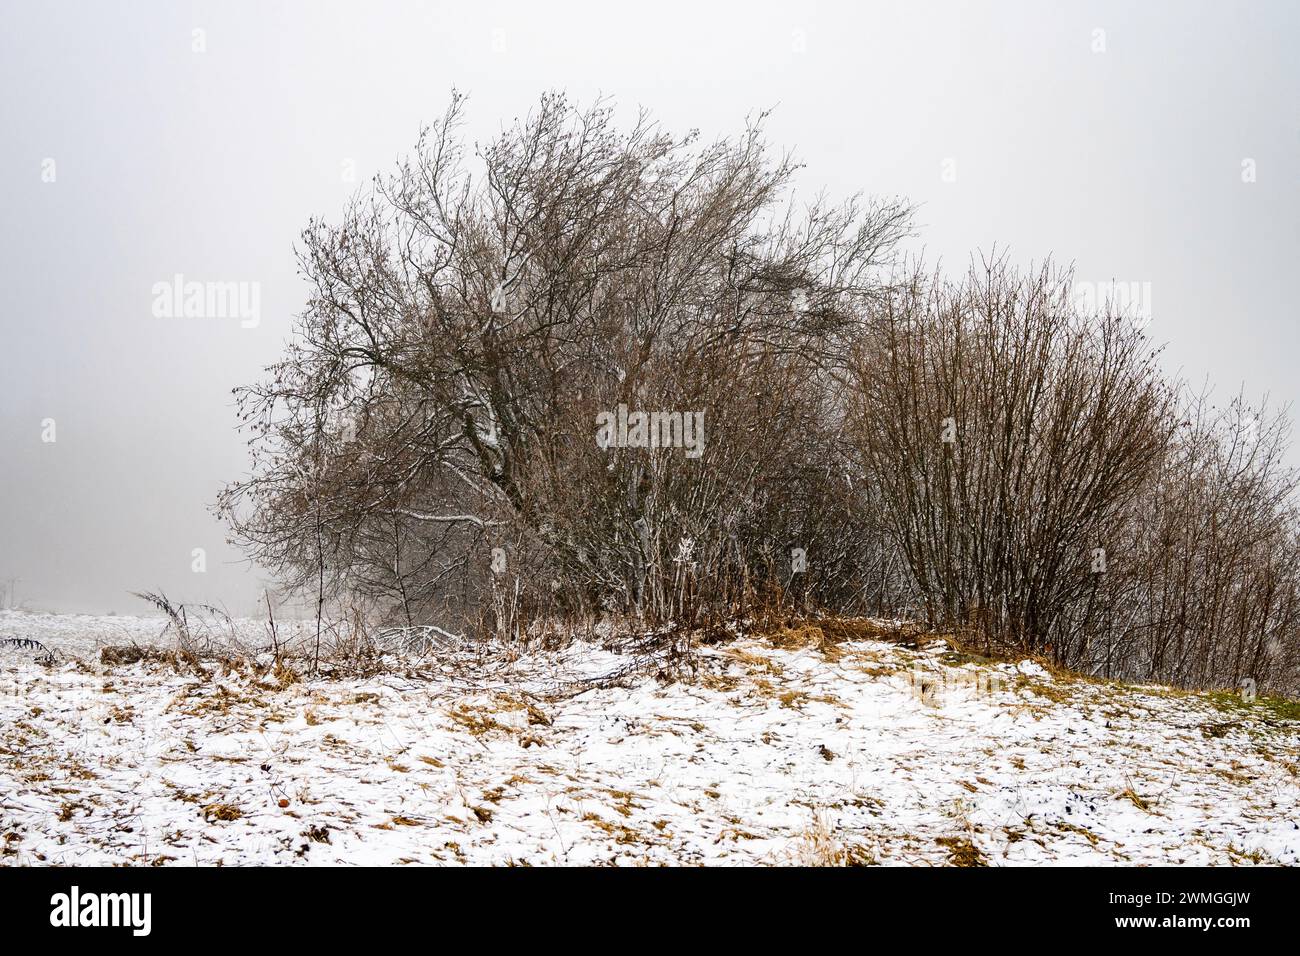 Lonely bare bush in mist on snowy mountain meadow after storm in winter. Stock Photo